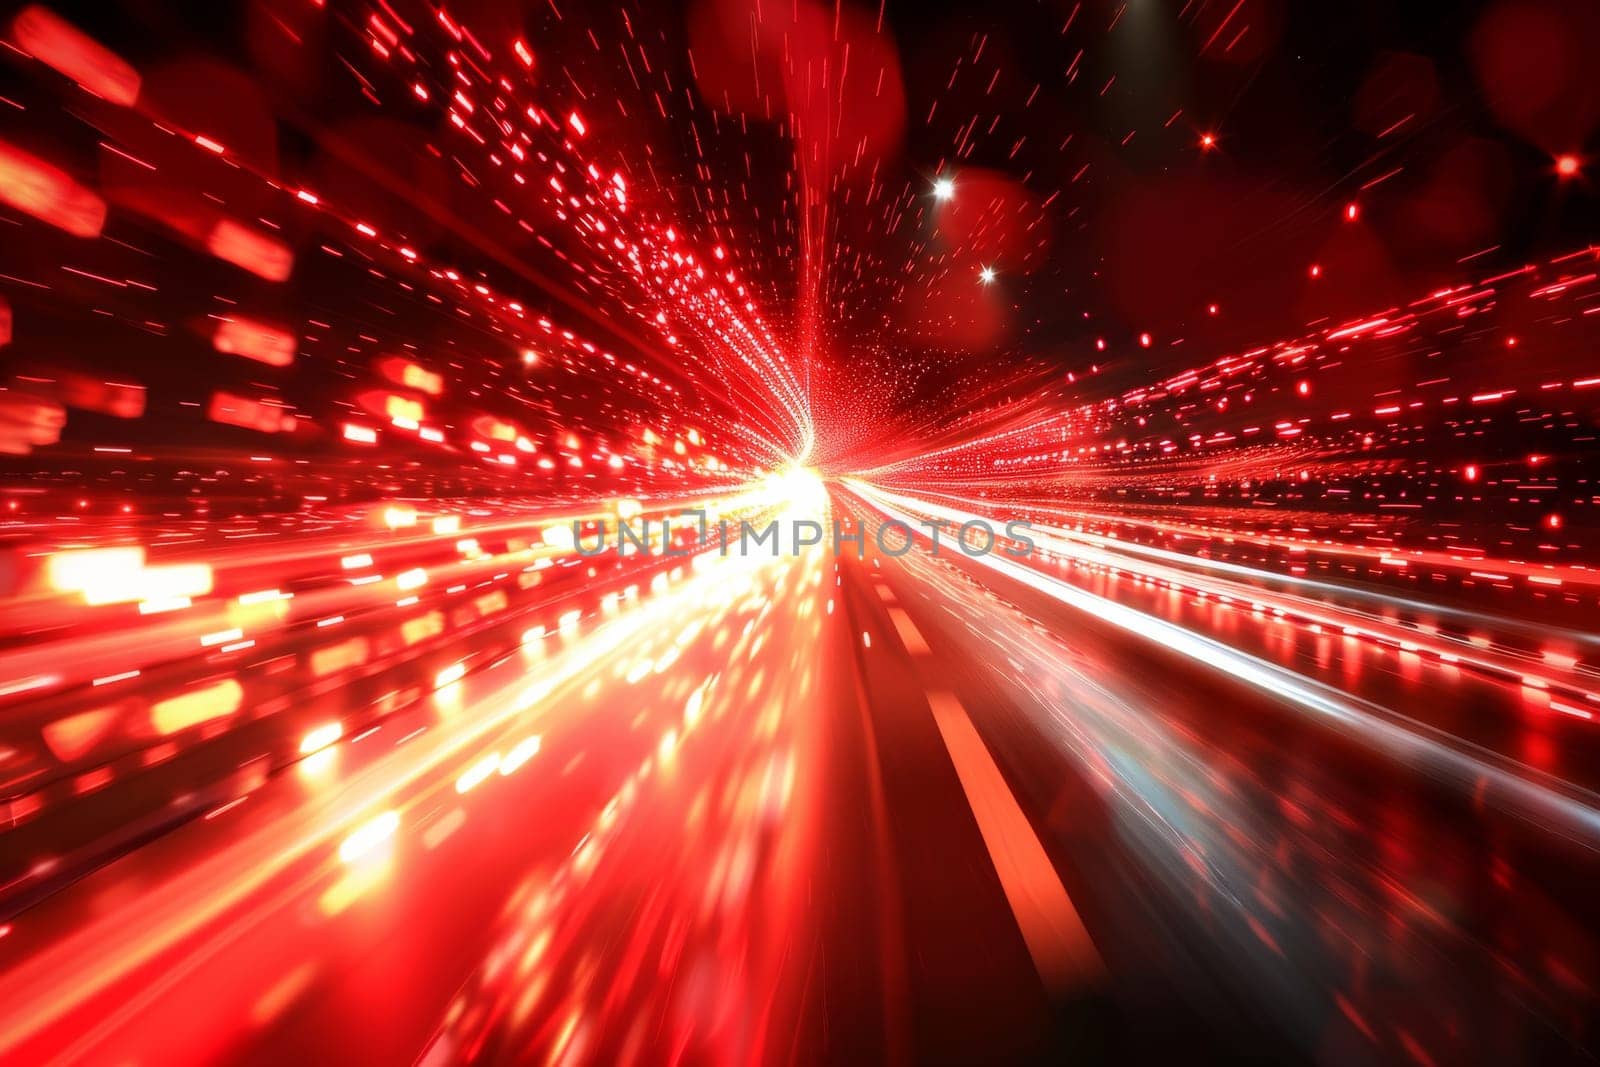 A red light is shown in the middle of a road. The light is surrounded by a blur of red and yellow lights. The scene is set in a city, with cars driving down the road